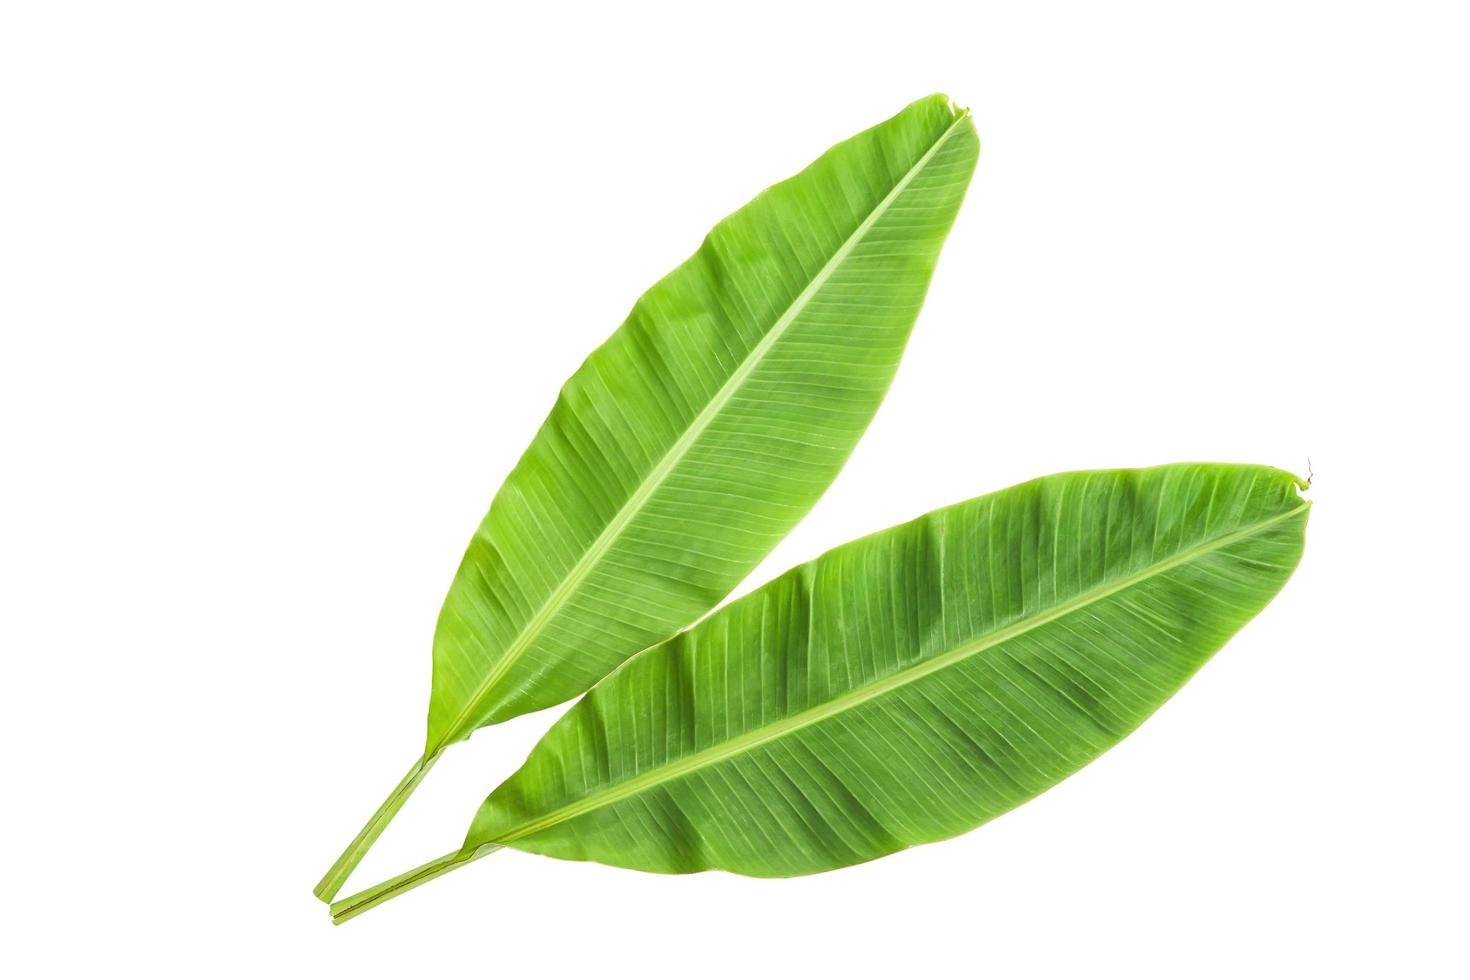 Banana leaves isolated over white. Photo includes CLIPPING PATH